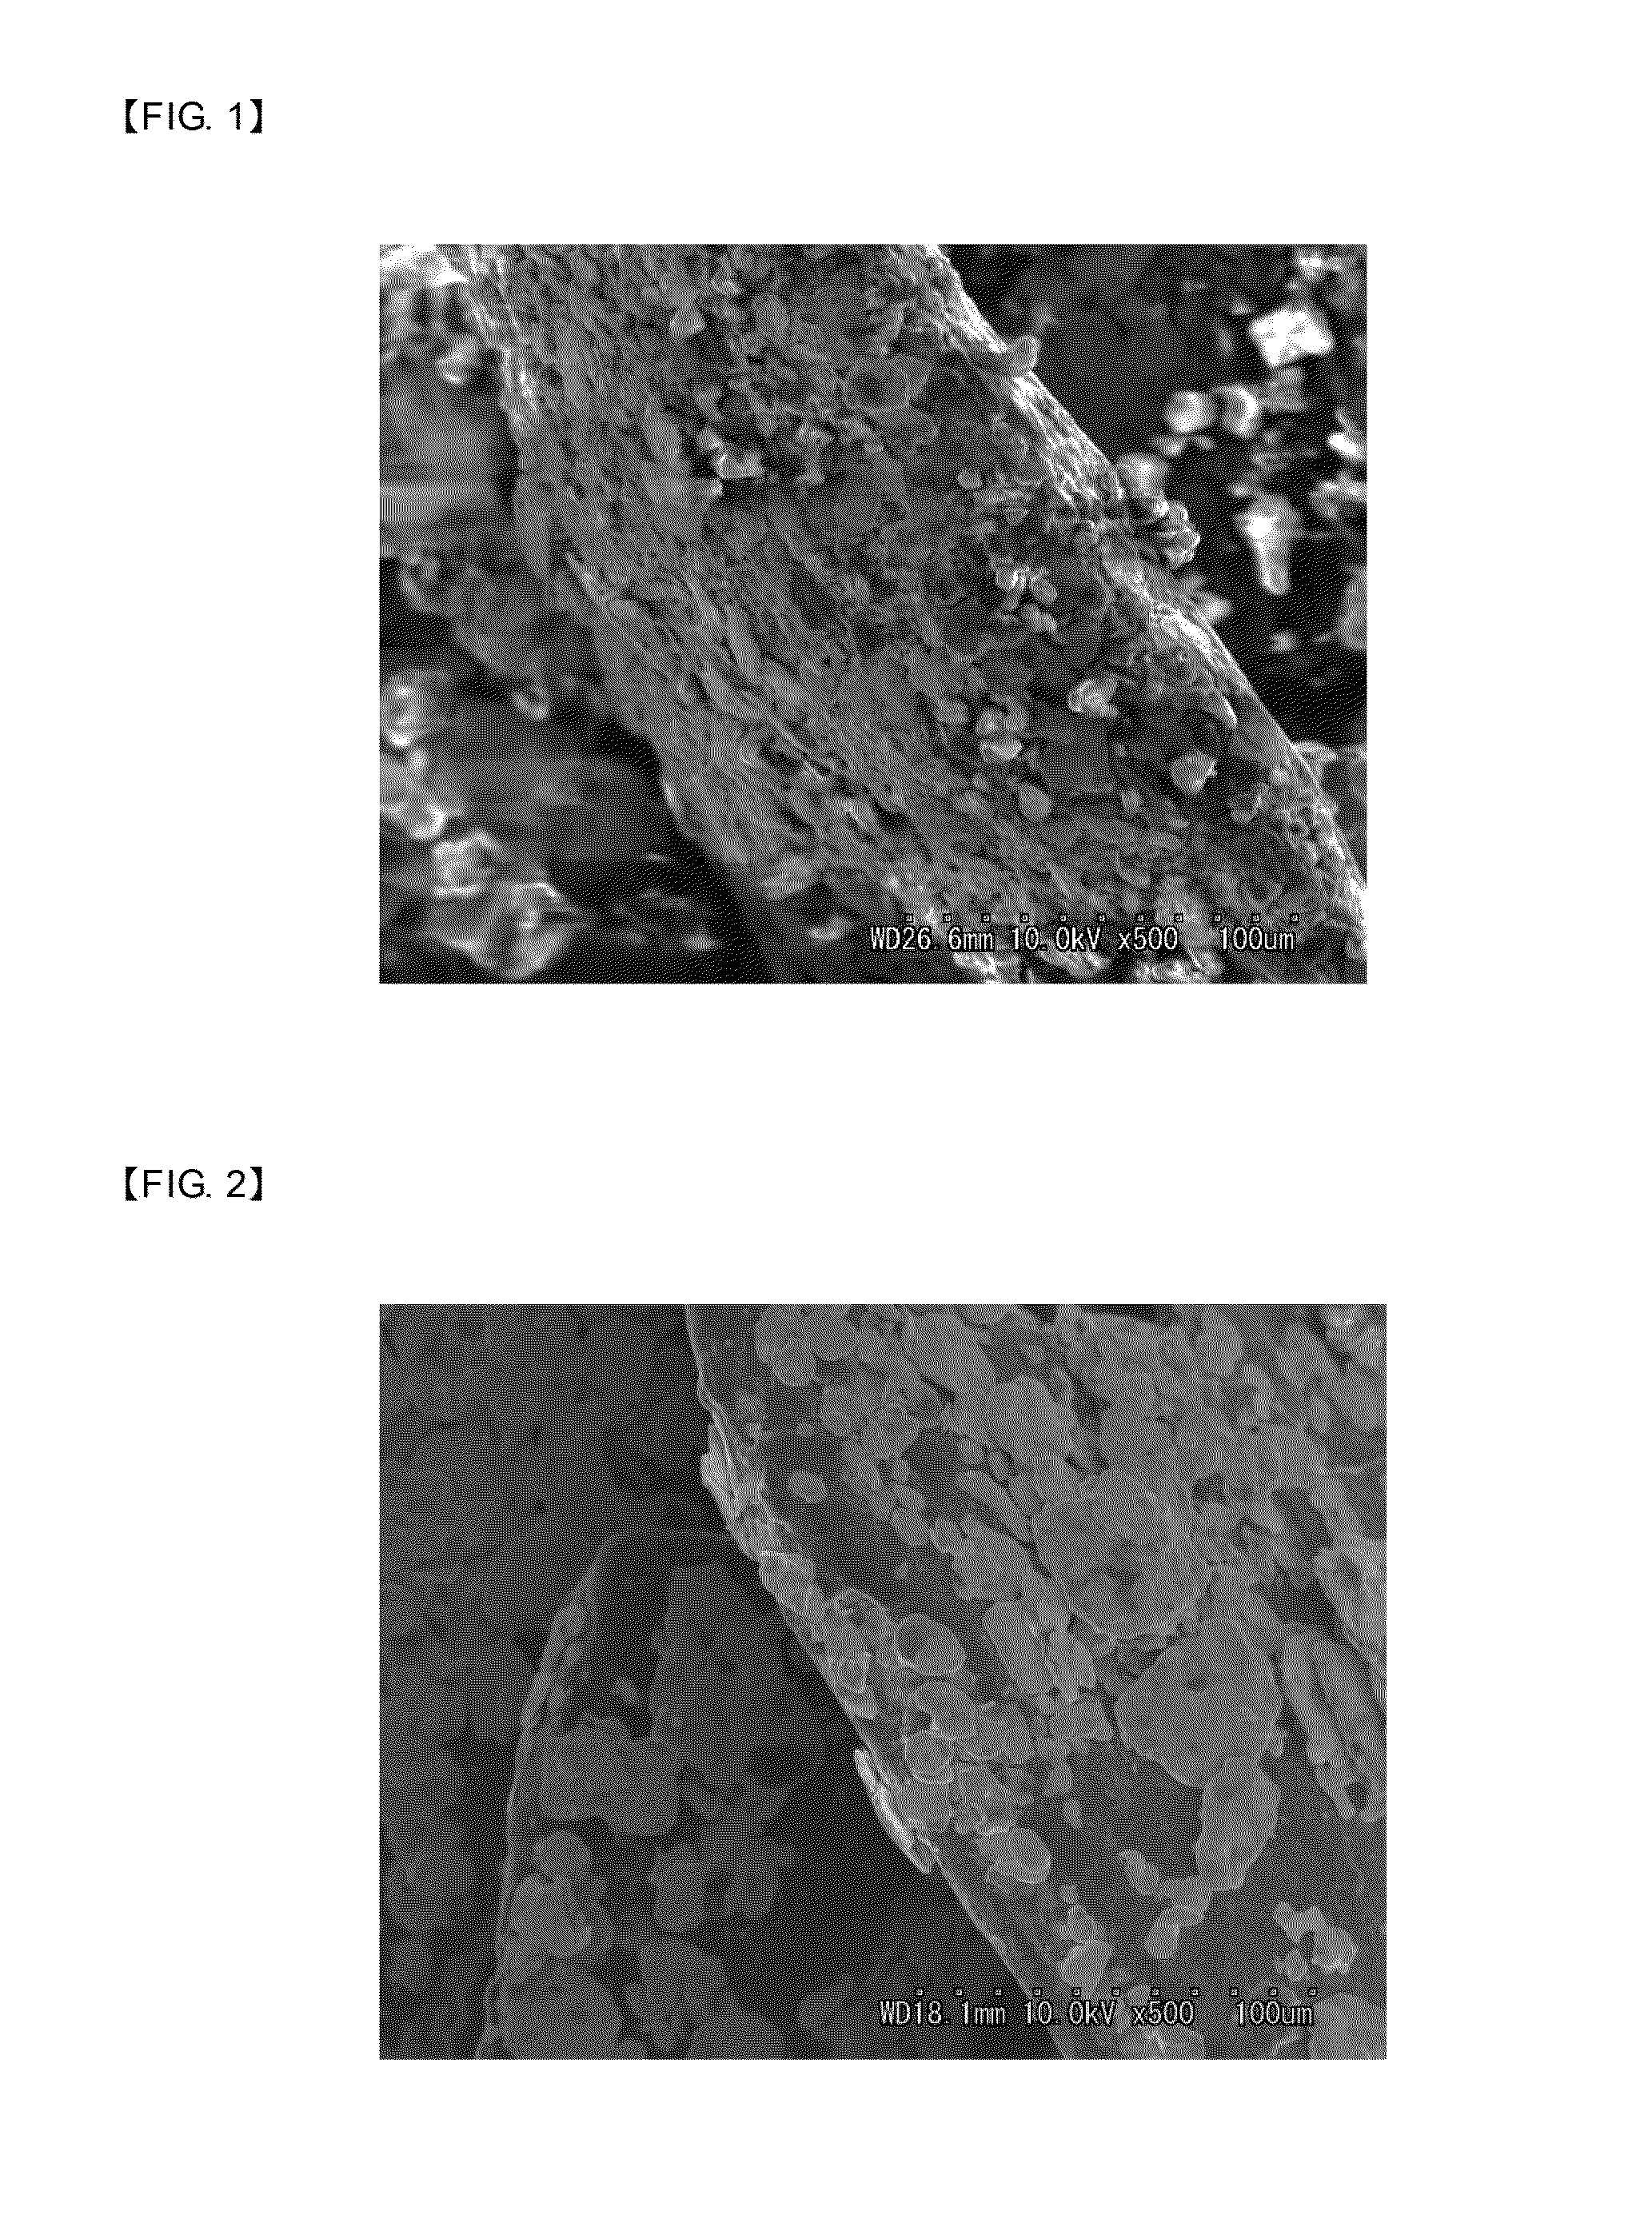 Urethane foam molded product and method for producing the same